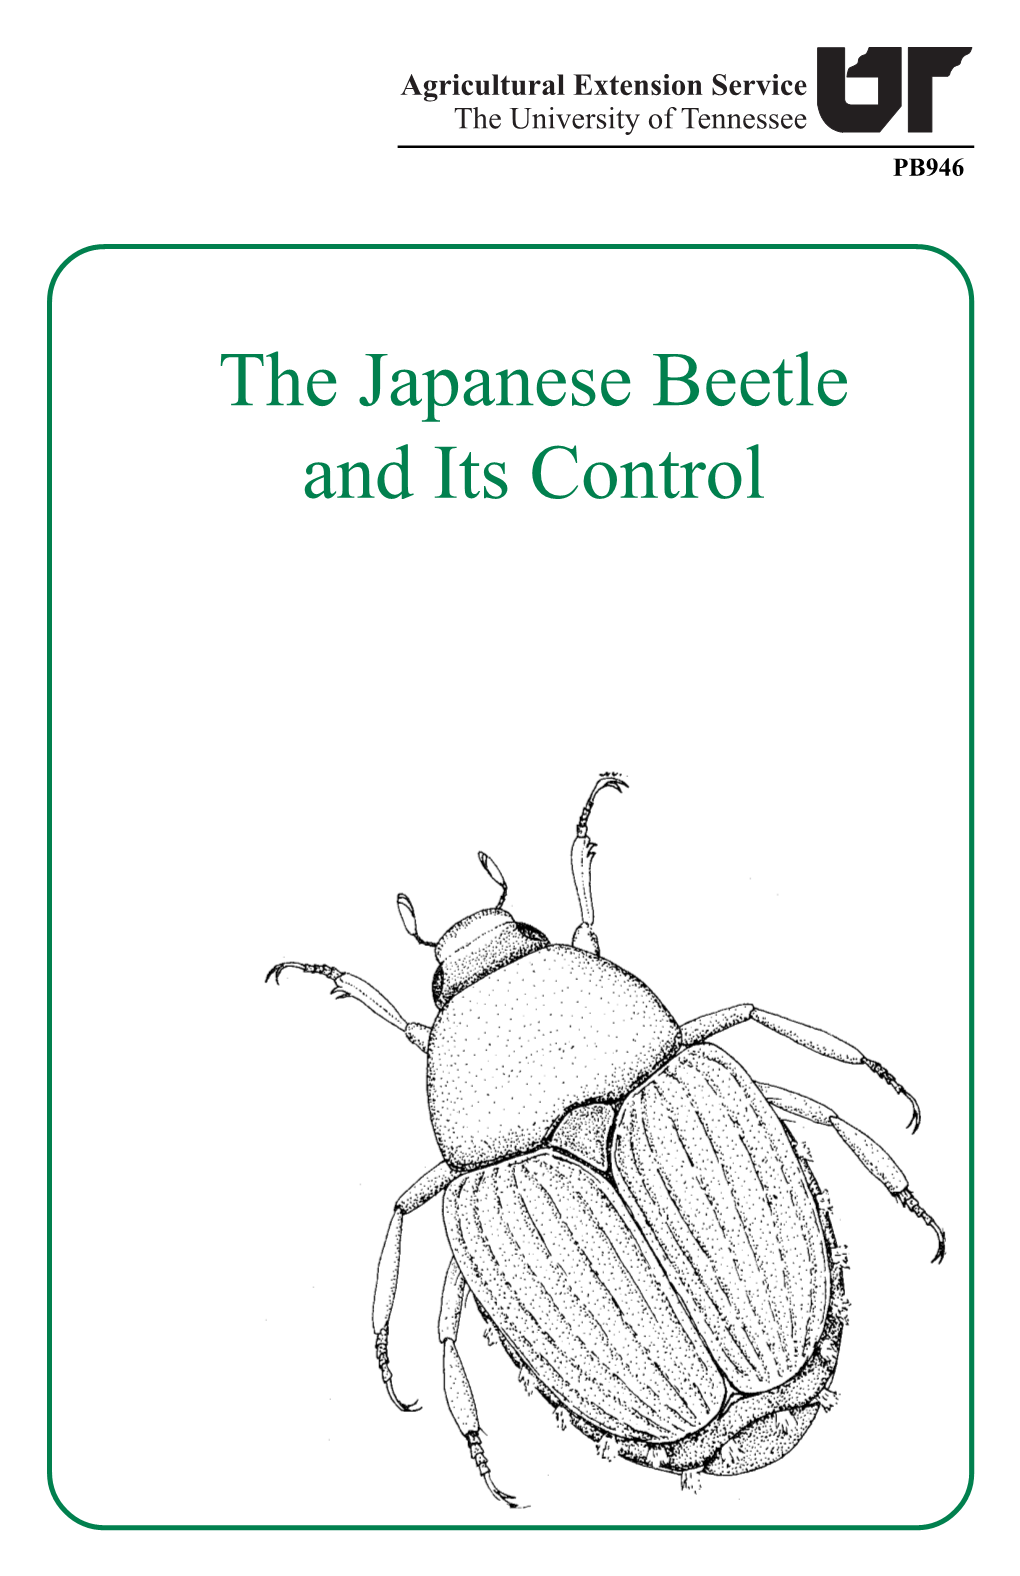 The Japanese Beetle and Its Control